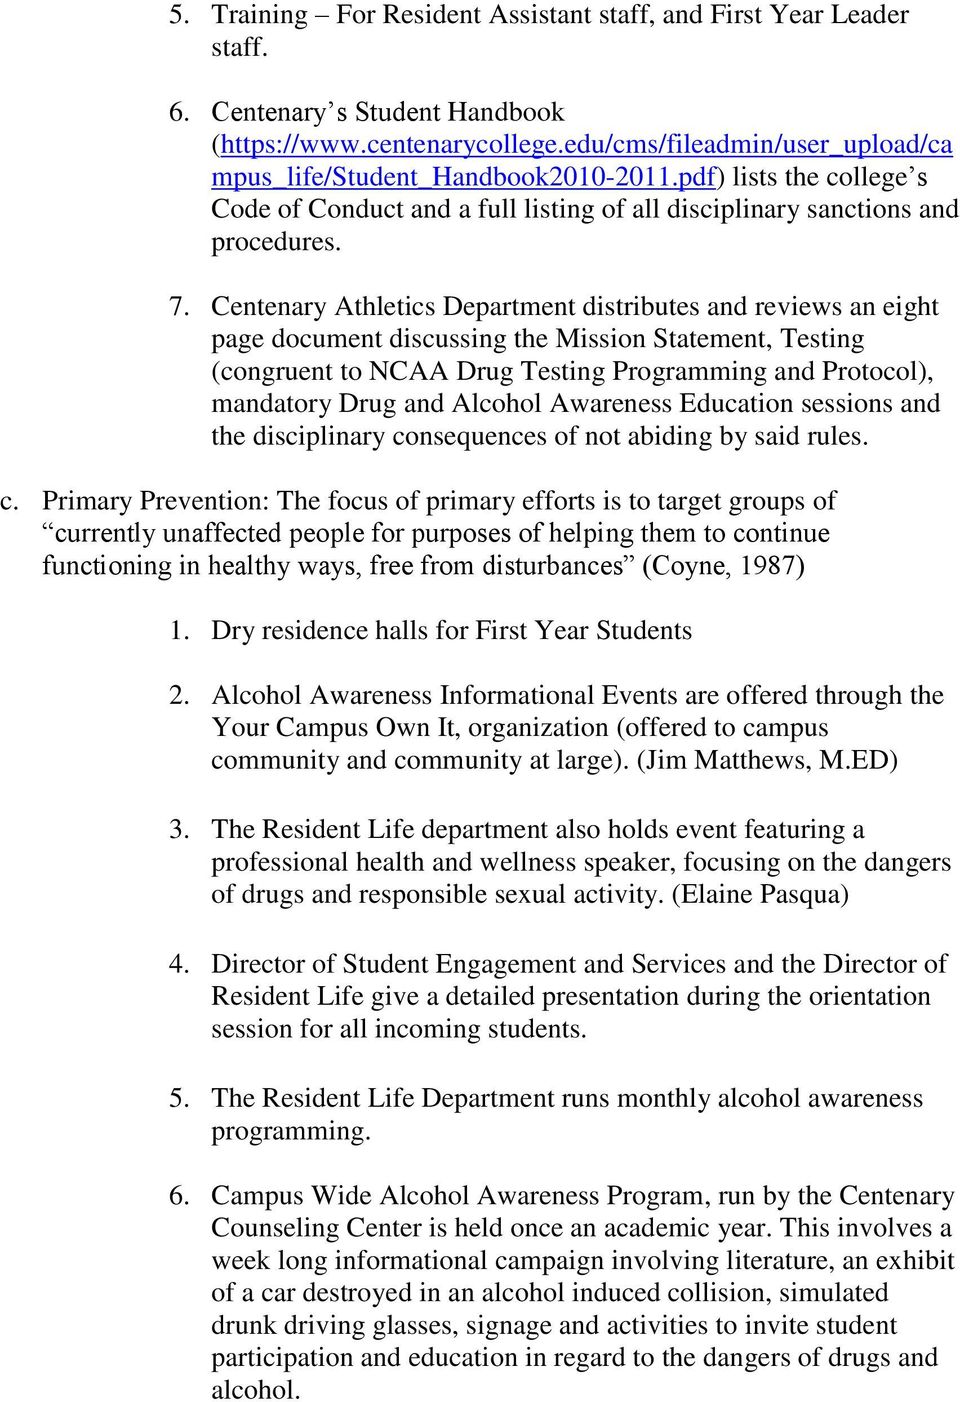 Centenary Athletics Department distributes and reviews an eight page document discussing the Mission Statement, Testing (congruent to NCAA Drug Testing Programming and Protocol), mandatory Drug and